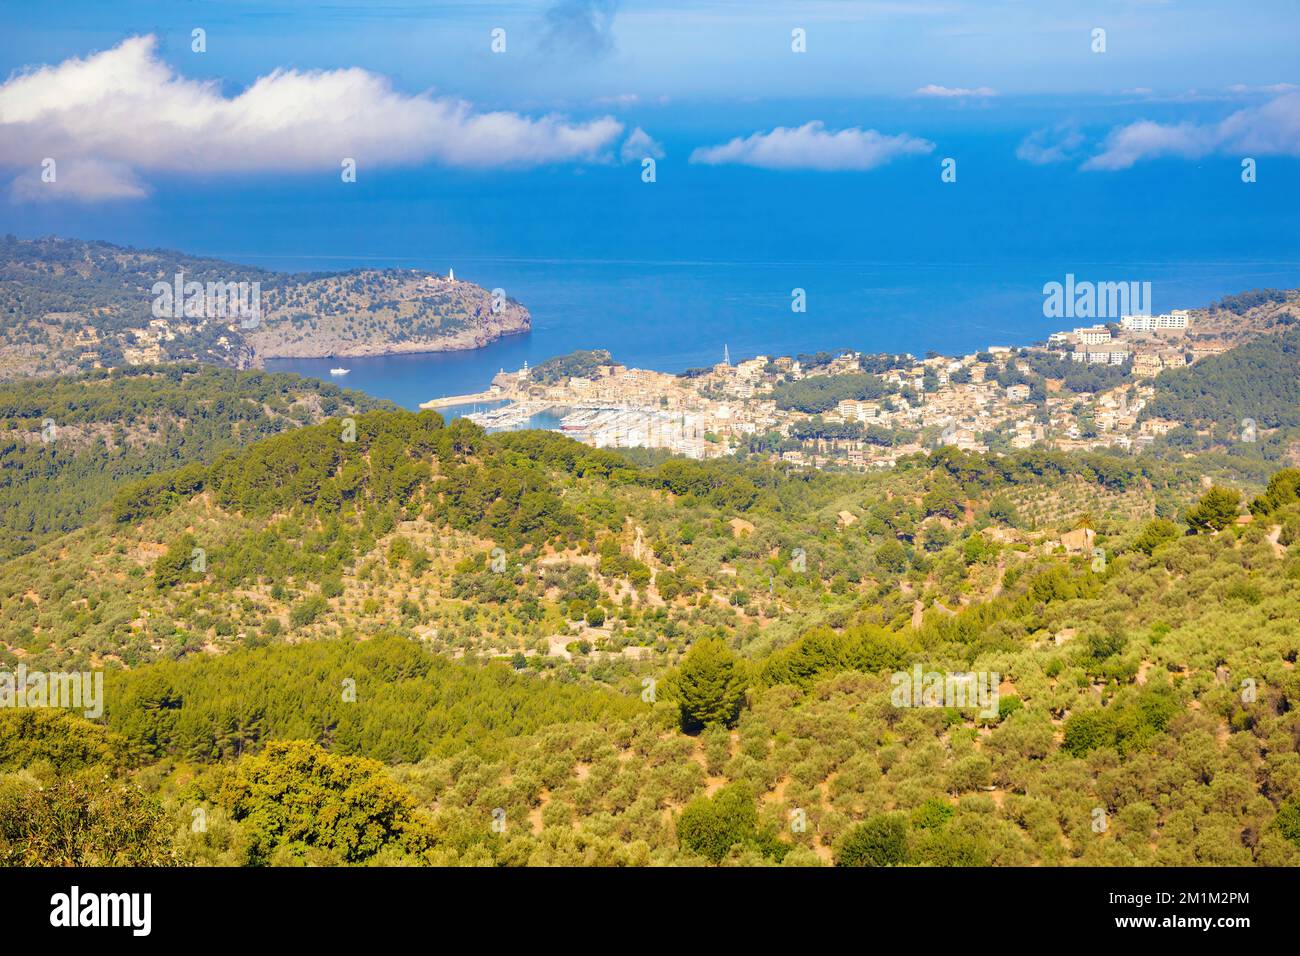 Panoramic aerial view of the bay of Sóller, seen from Miador de Ses Barques, Majorca Island, Spain Stock Photo